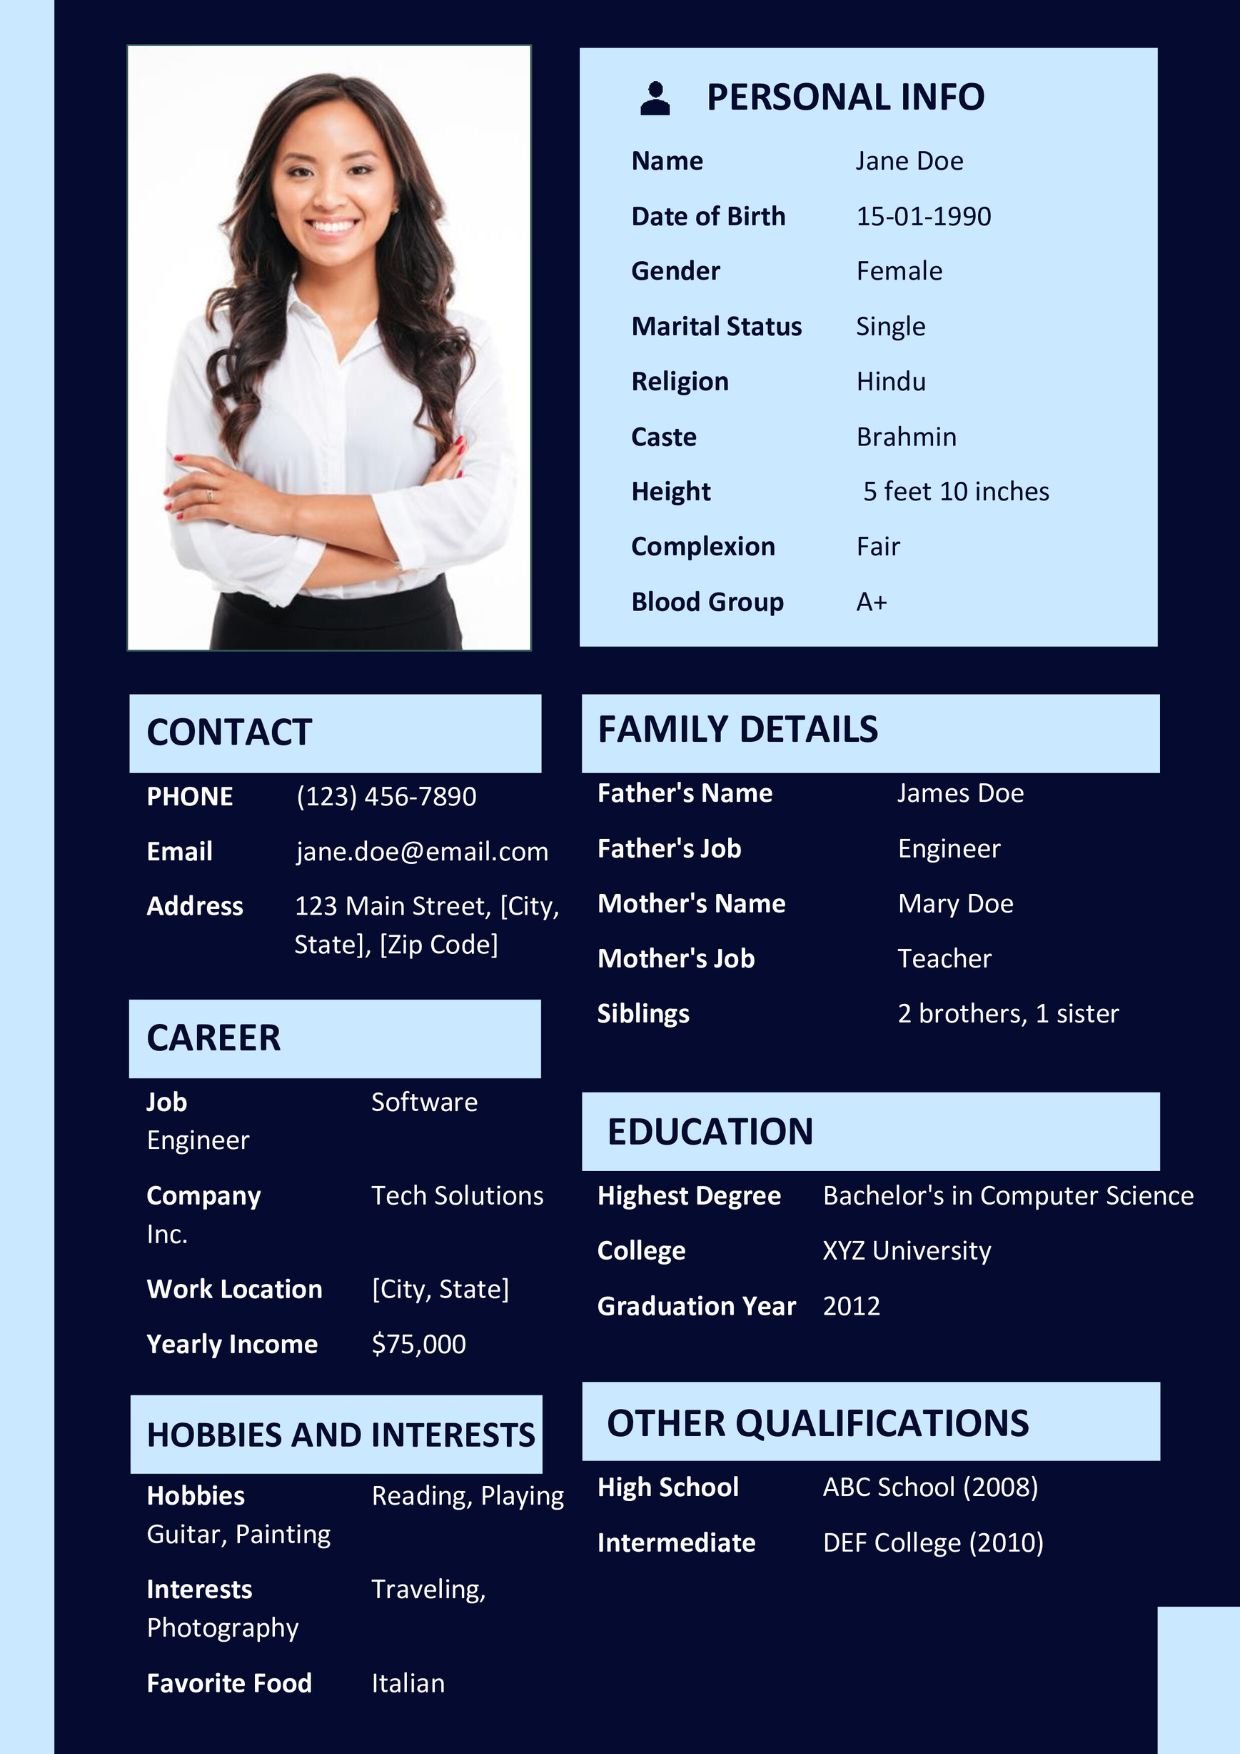 Biodata Format for Marriage | Marriage Biodata Template